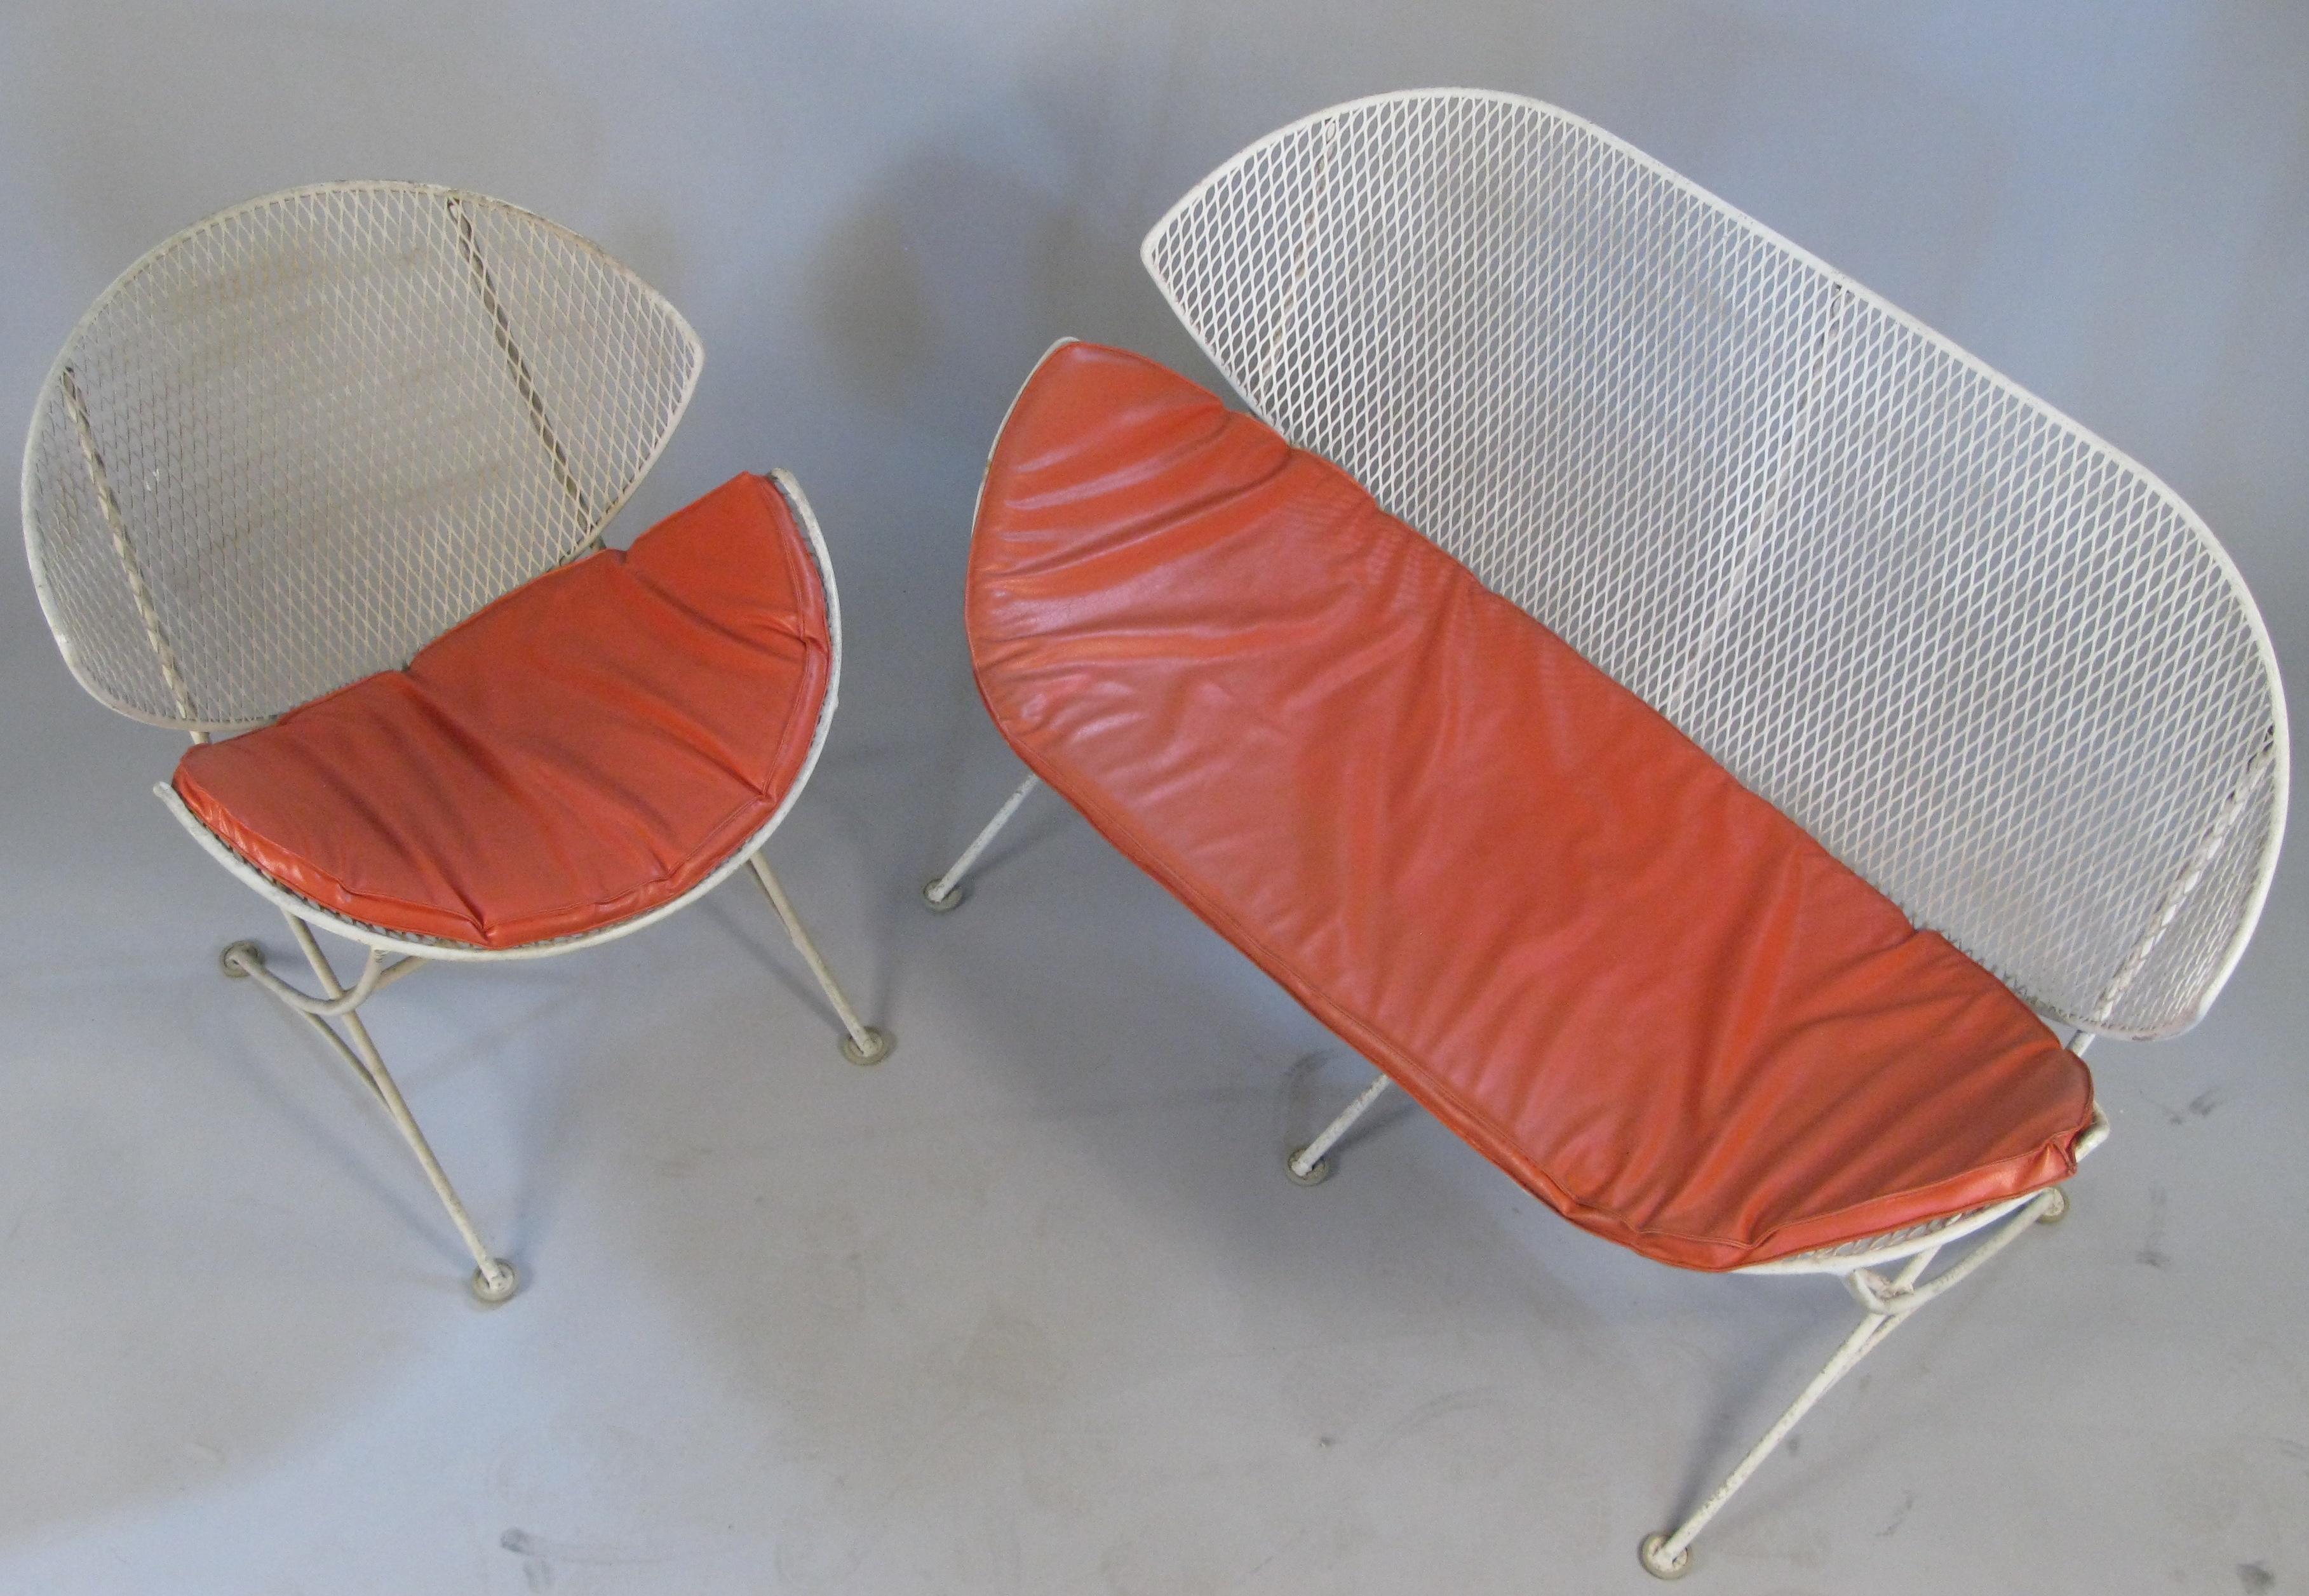 A vintage 1950s matching settee and lounge chair from the Orange Slice series by Salterini. These classic and iconic pieces are beautiful and comfortable. They are in their original white finish with age expected wear to the finish, and both pieces